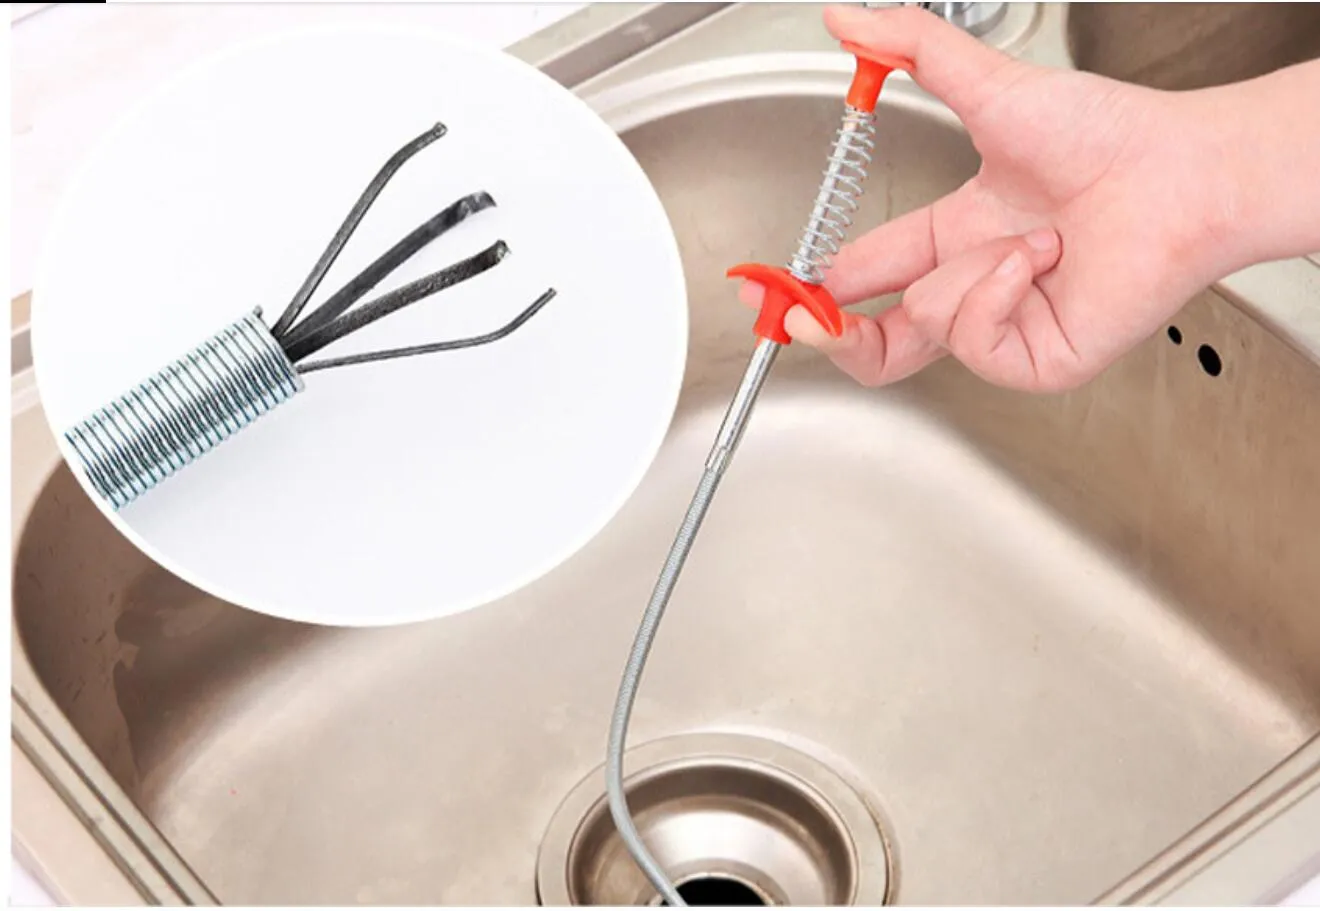 24.4 Inch Spring Pipe Dredging Tools, Drain Snake, Drain Cleaner Sticks Clog  Remover Deep Fryer Cleaning Tools Household For Kitchen Sink From  Beautylife88, $7.17